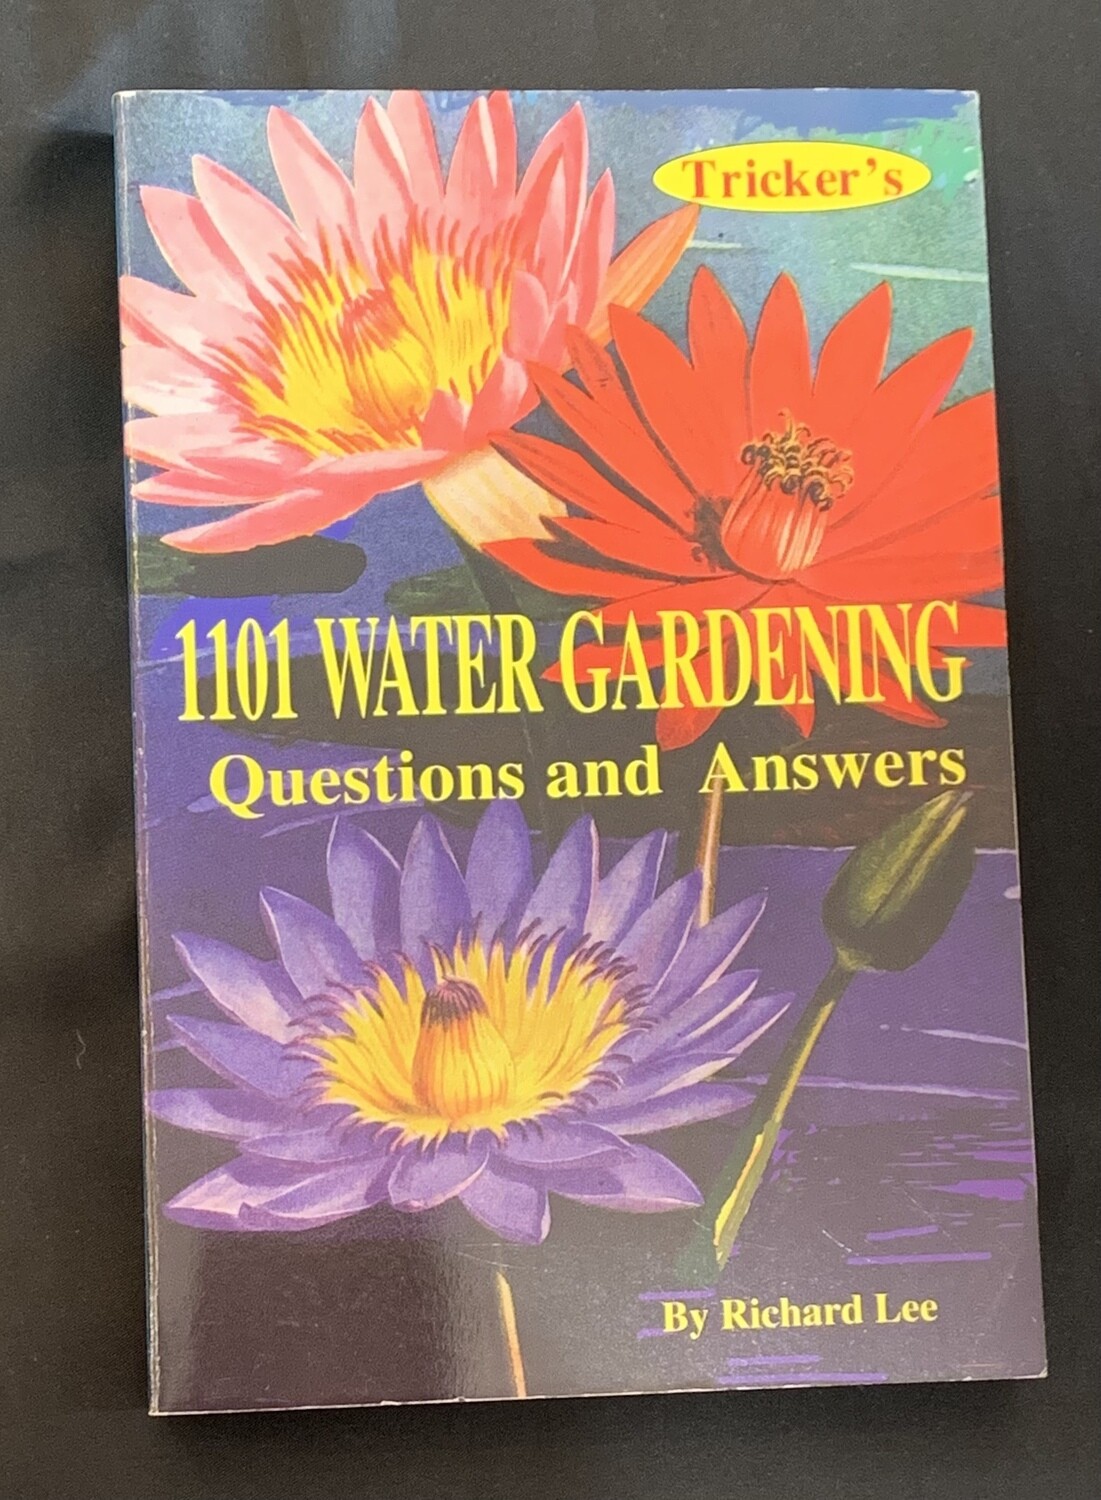 1101 Water Gardening Questions by Richard Lee